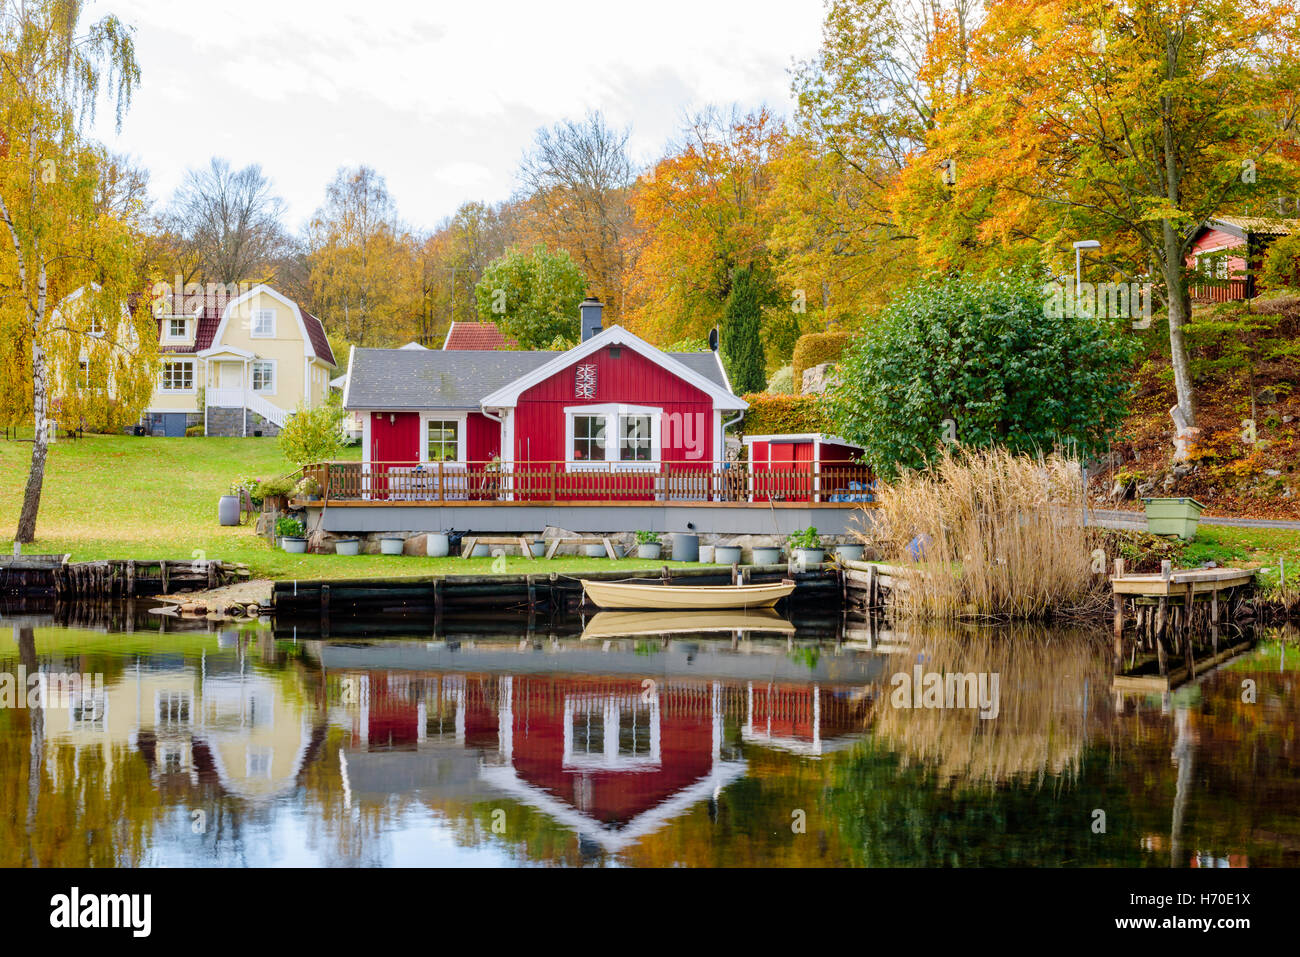 Bokevik, Sweden - October 25, 2016: Environmental documentary of coastal lifestyle. Seaside home with private pier and a small r Stock Photo